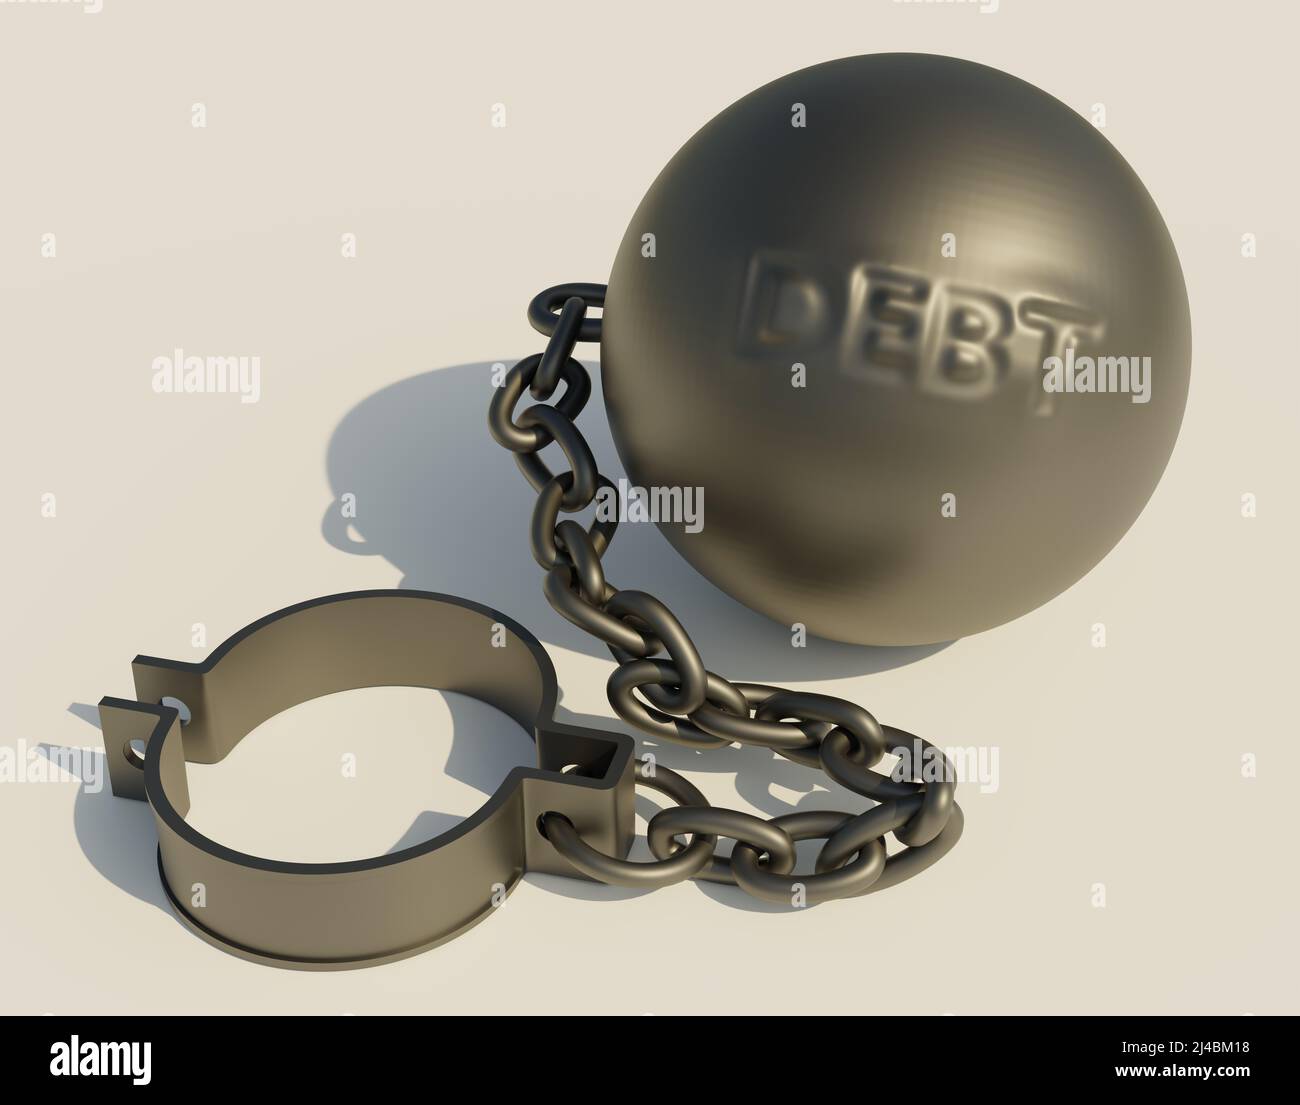 3d Rendering Of A Lying Iron Ball Attached To A Shackle With A Strong Chain  Stock Photo - Download Image Now - iStock